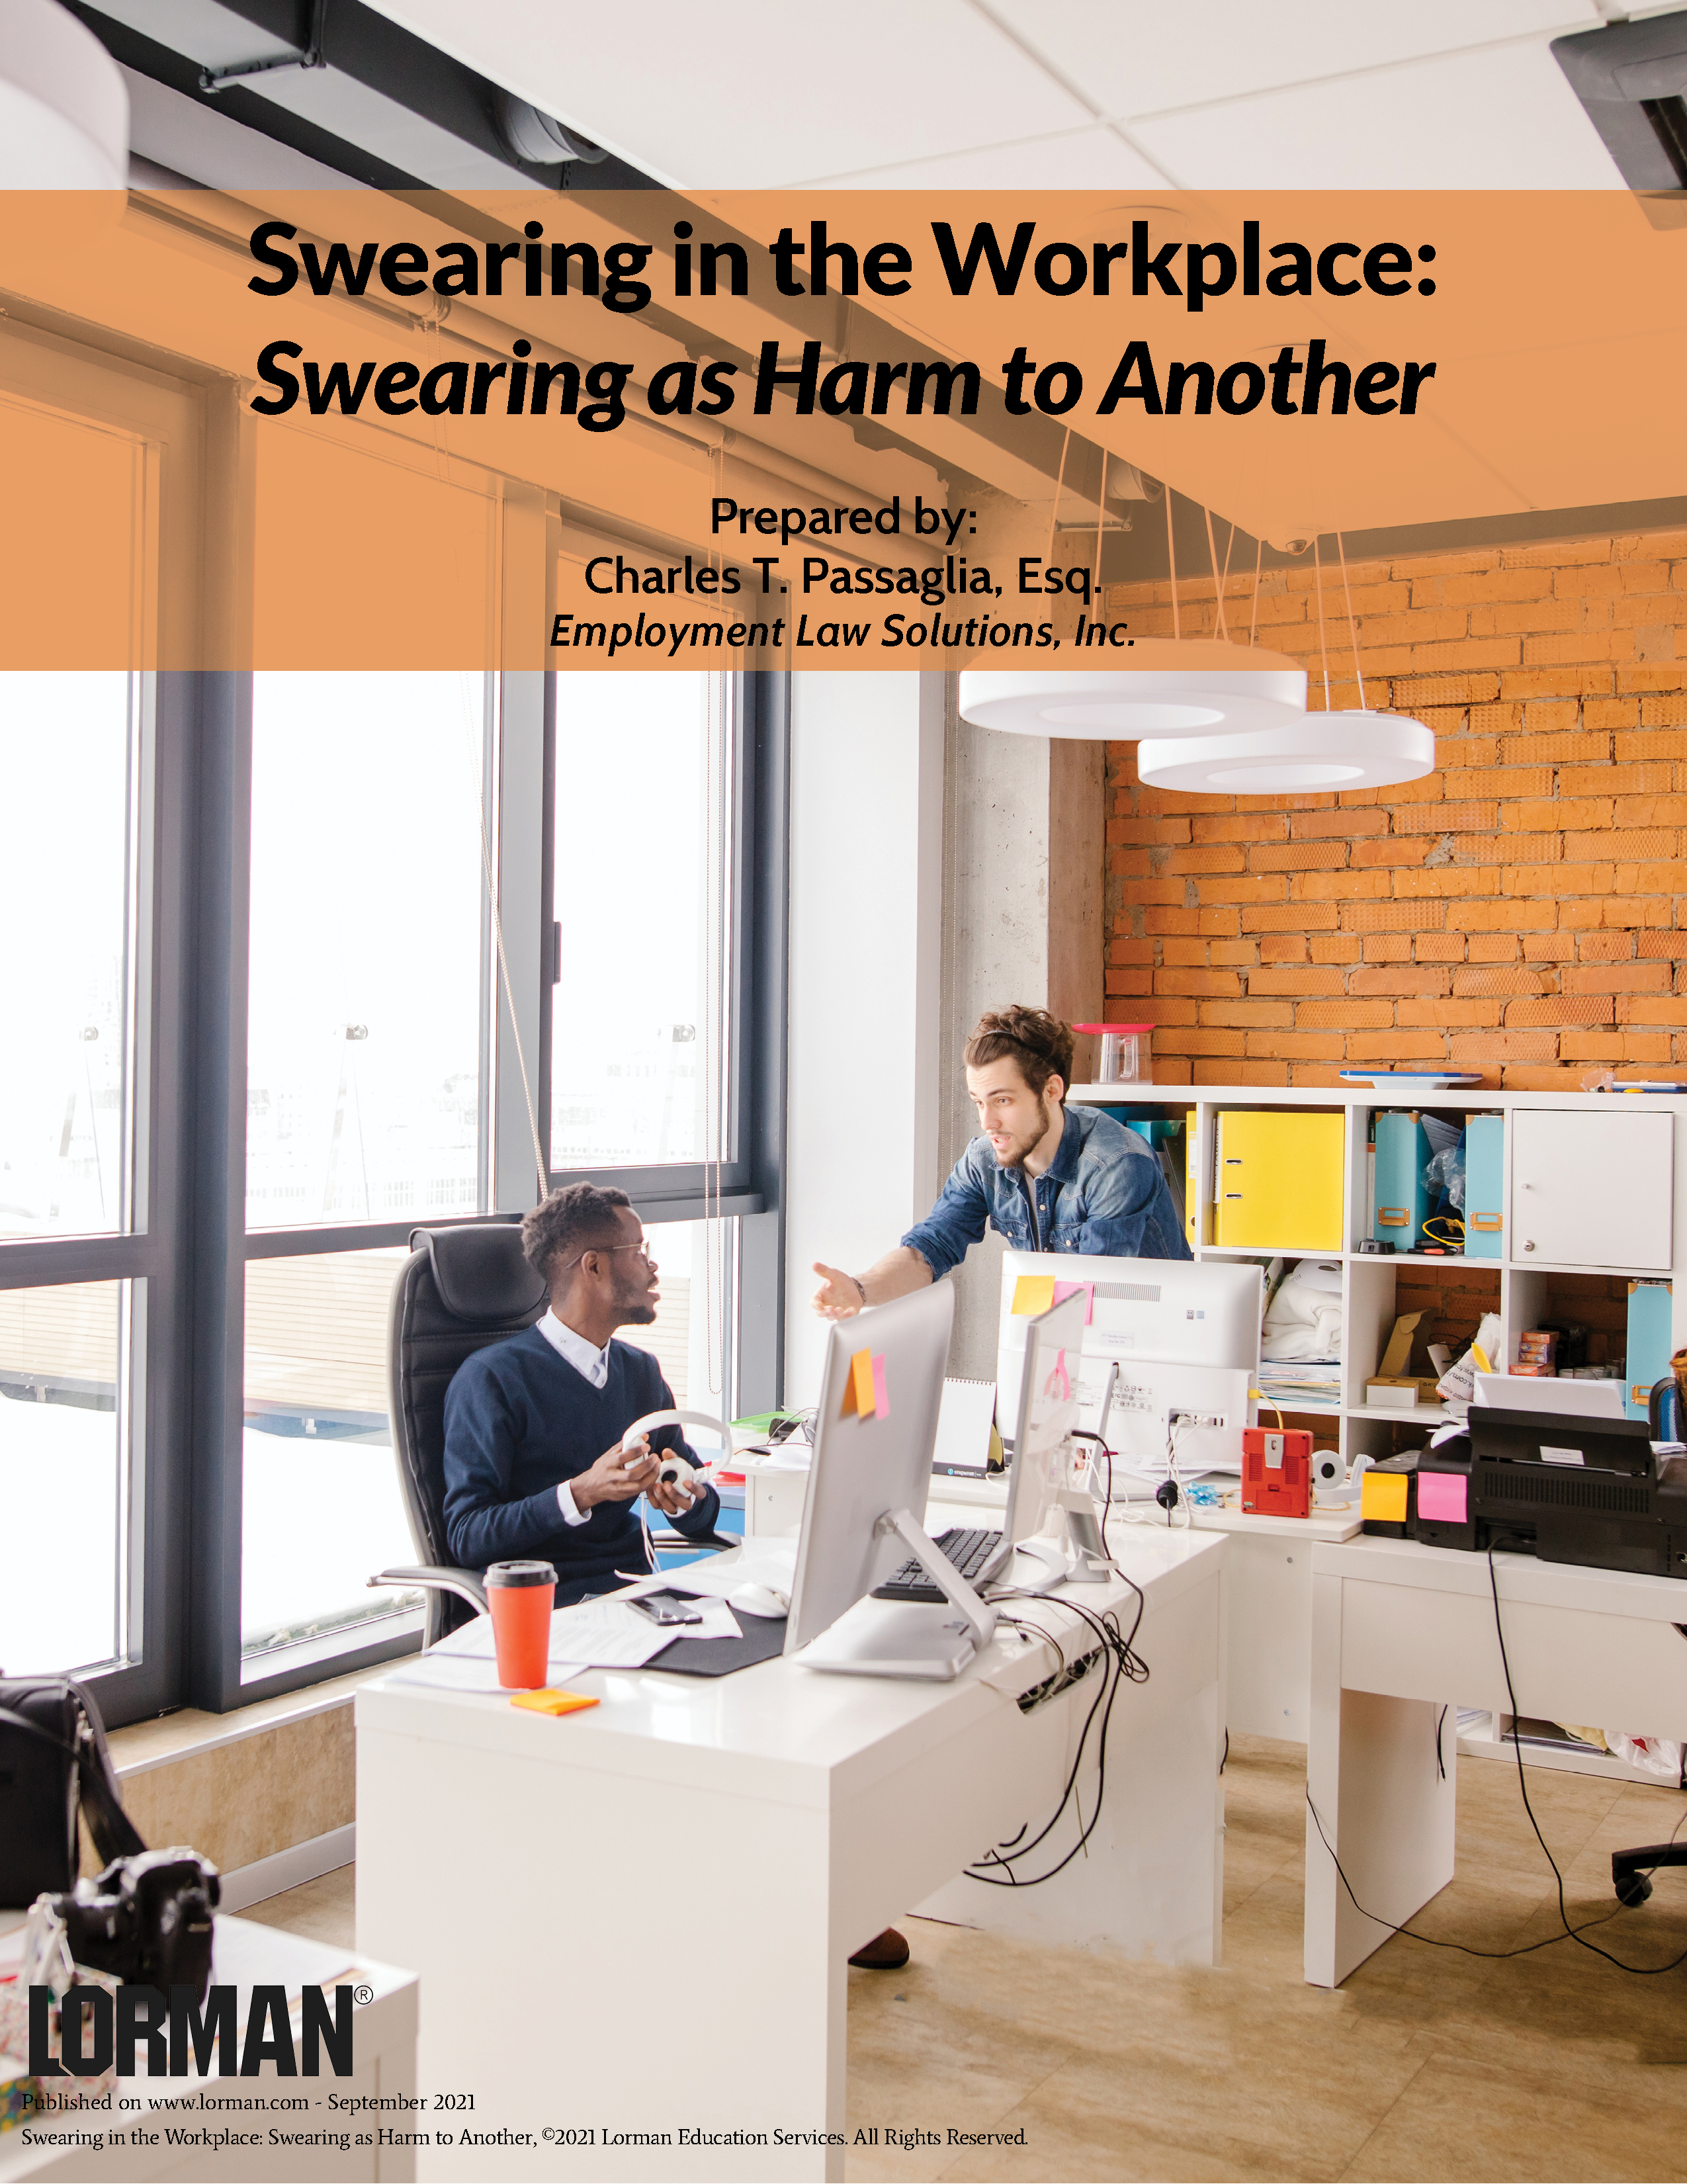 Swearing in the Workplace: Swearing as Harm to Another